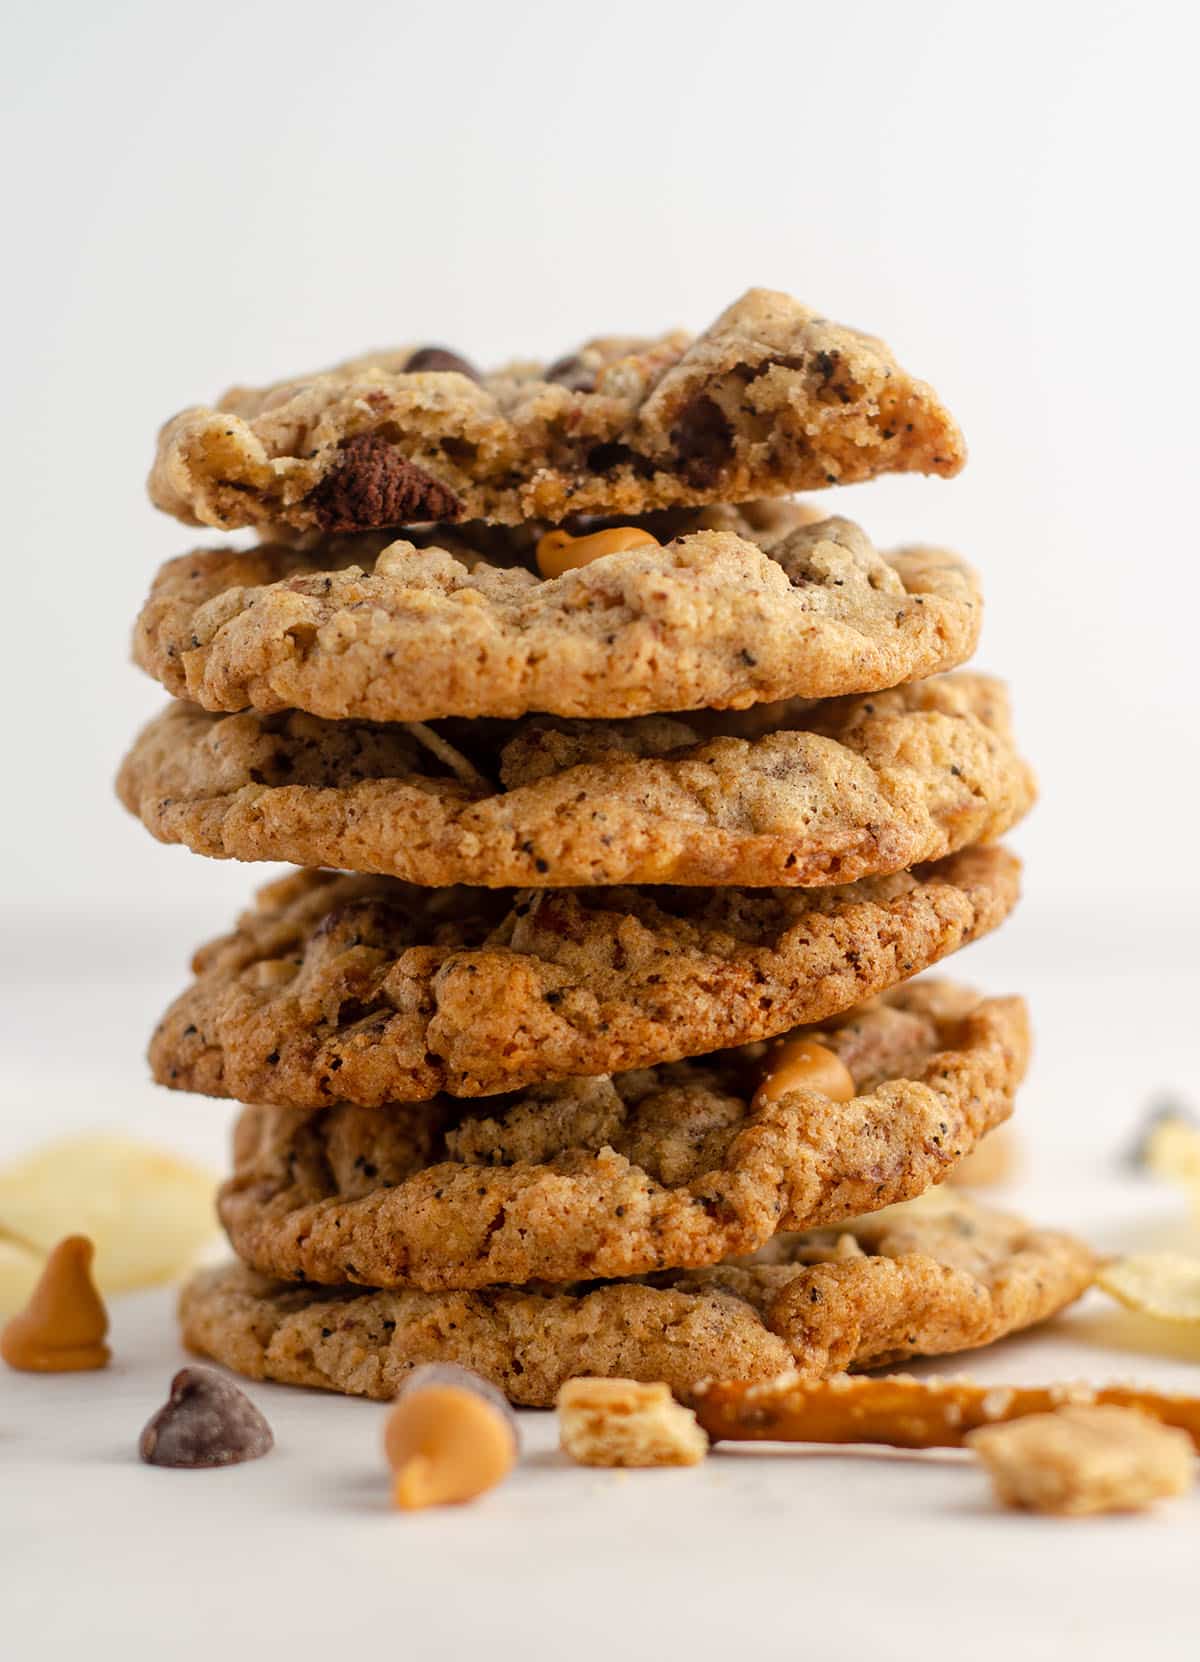 stack of compost cookies scattered with chips, pretzel pieces, chocolate chips, and butterscotch chips